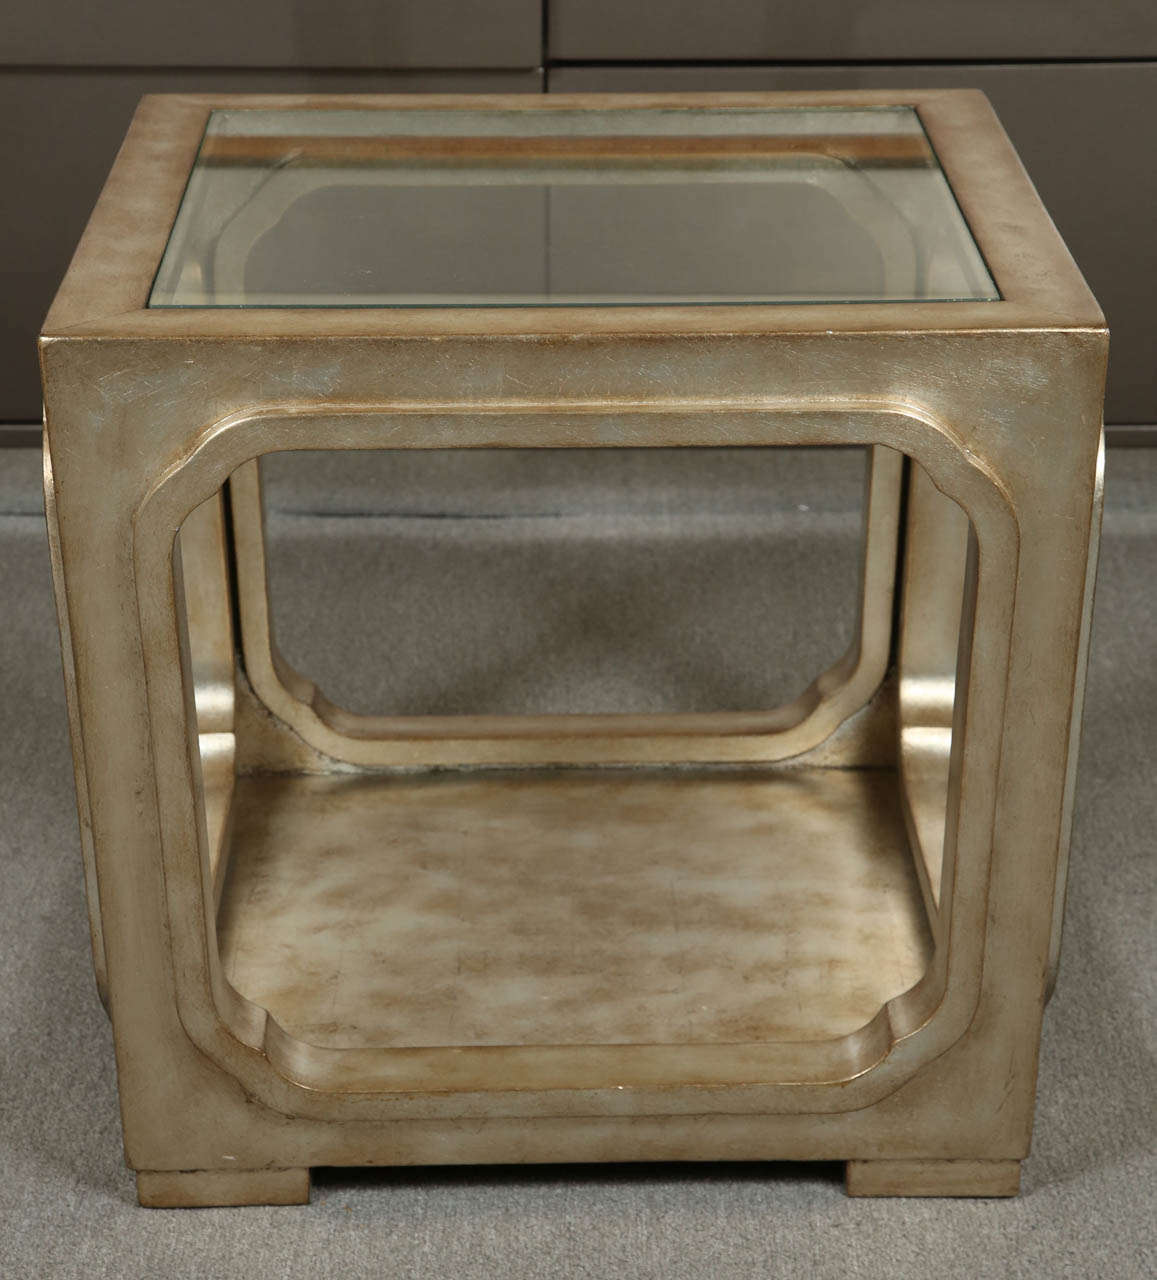 Elegant side table by James Mont.
The wooden table has a glassed silver leaf finish and an inset glass top.